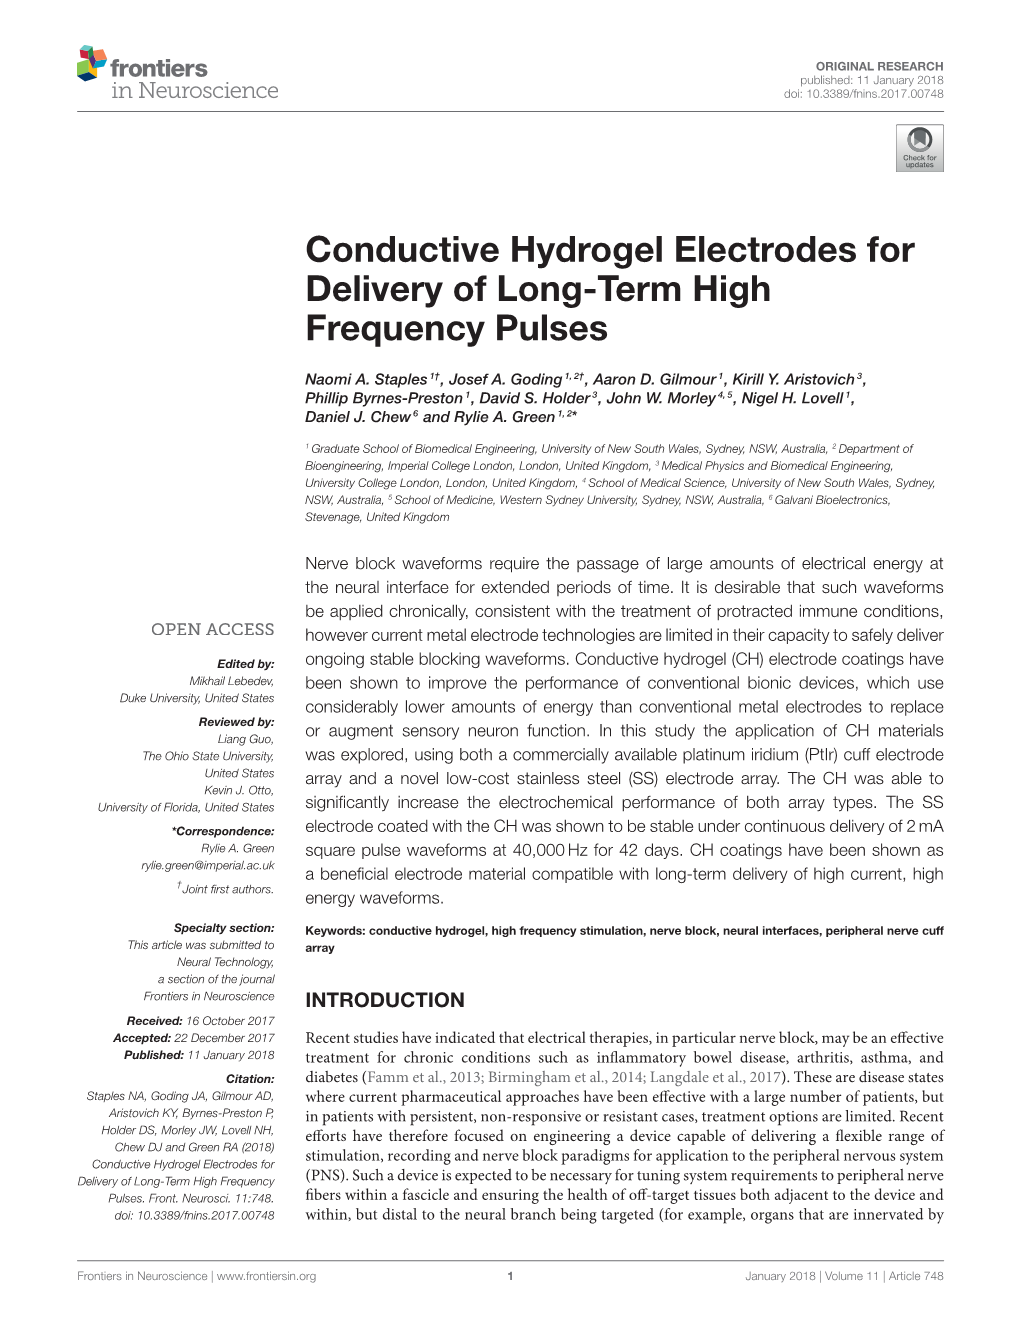 Conductive Hydrogel Electrodes for Delivery of Long-Term High Frequency Pulses